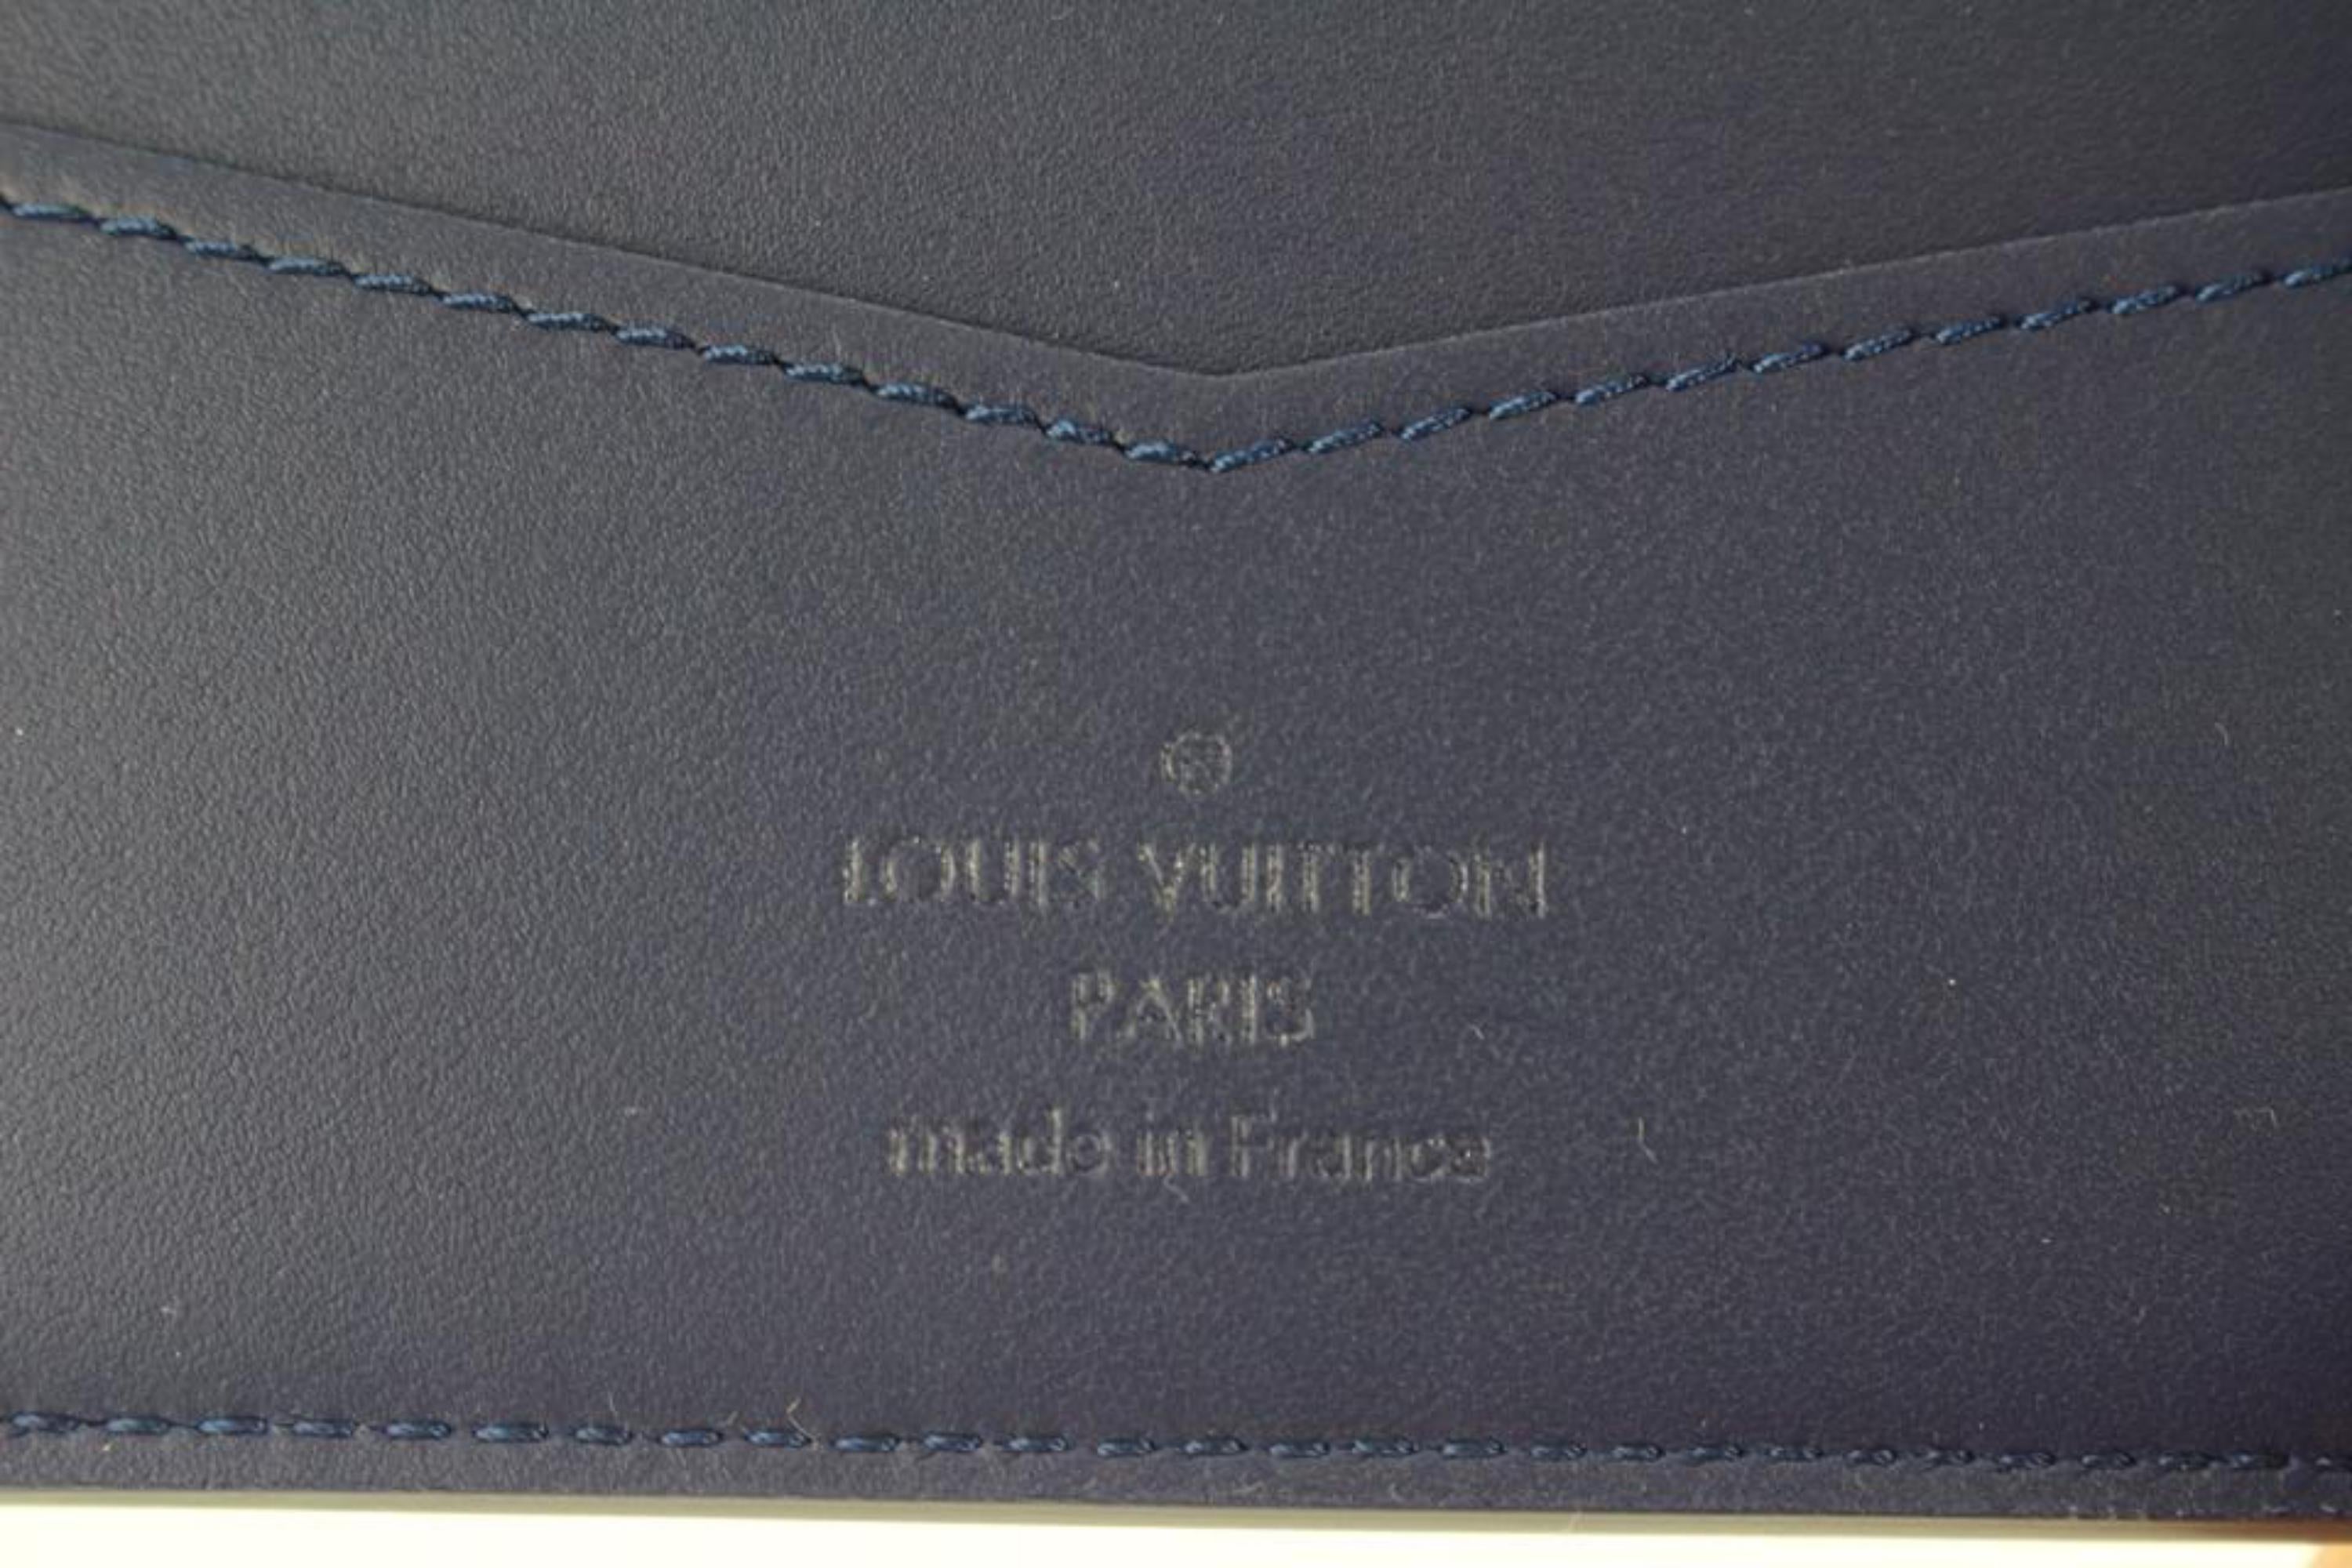 louis vuitton made in france wallet